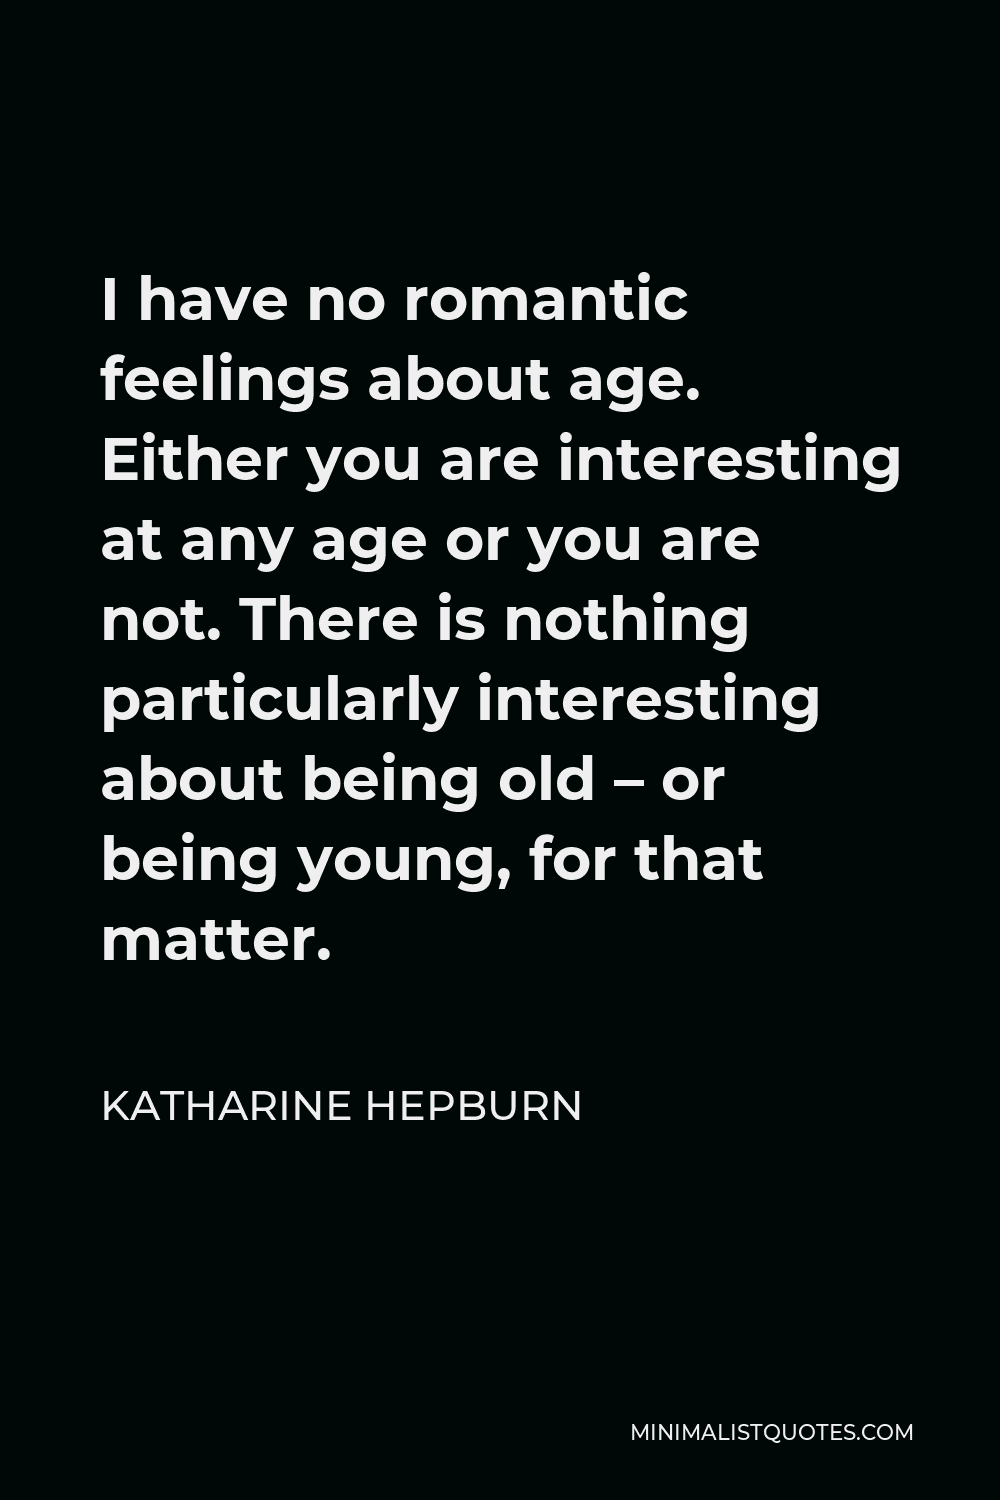 Katharine Hepburn Quote - I have no romantic feelings about age. Either you are interesting at any age or you are not. There is nothing particularly interesting about being old – or being young, for that matter.